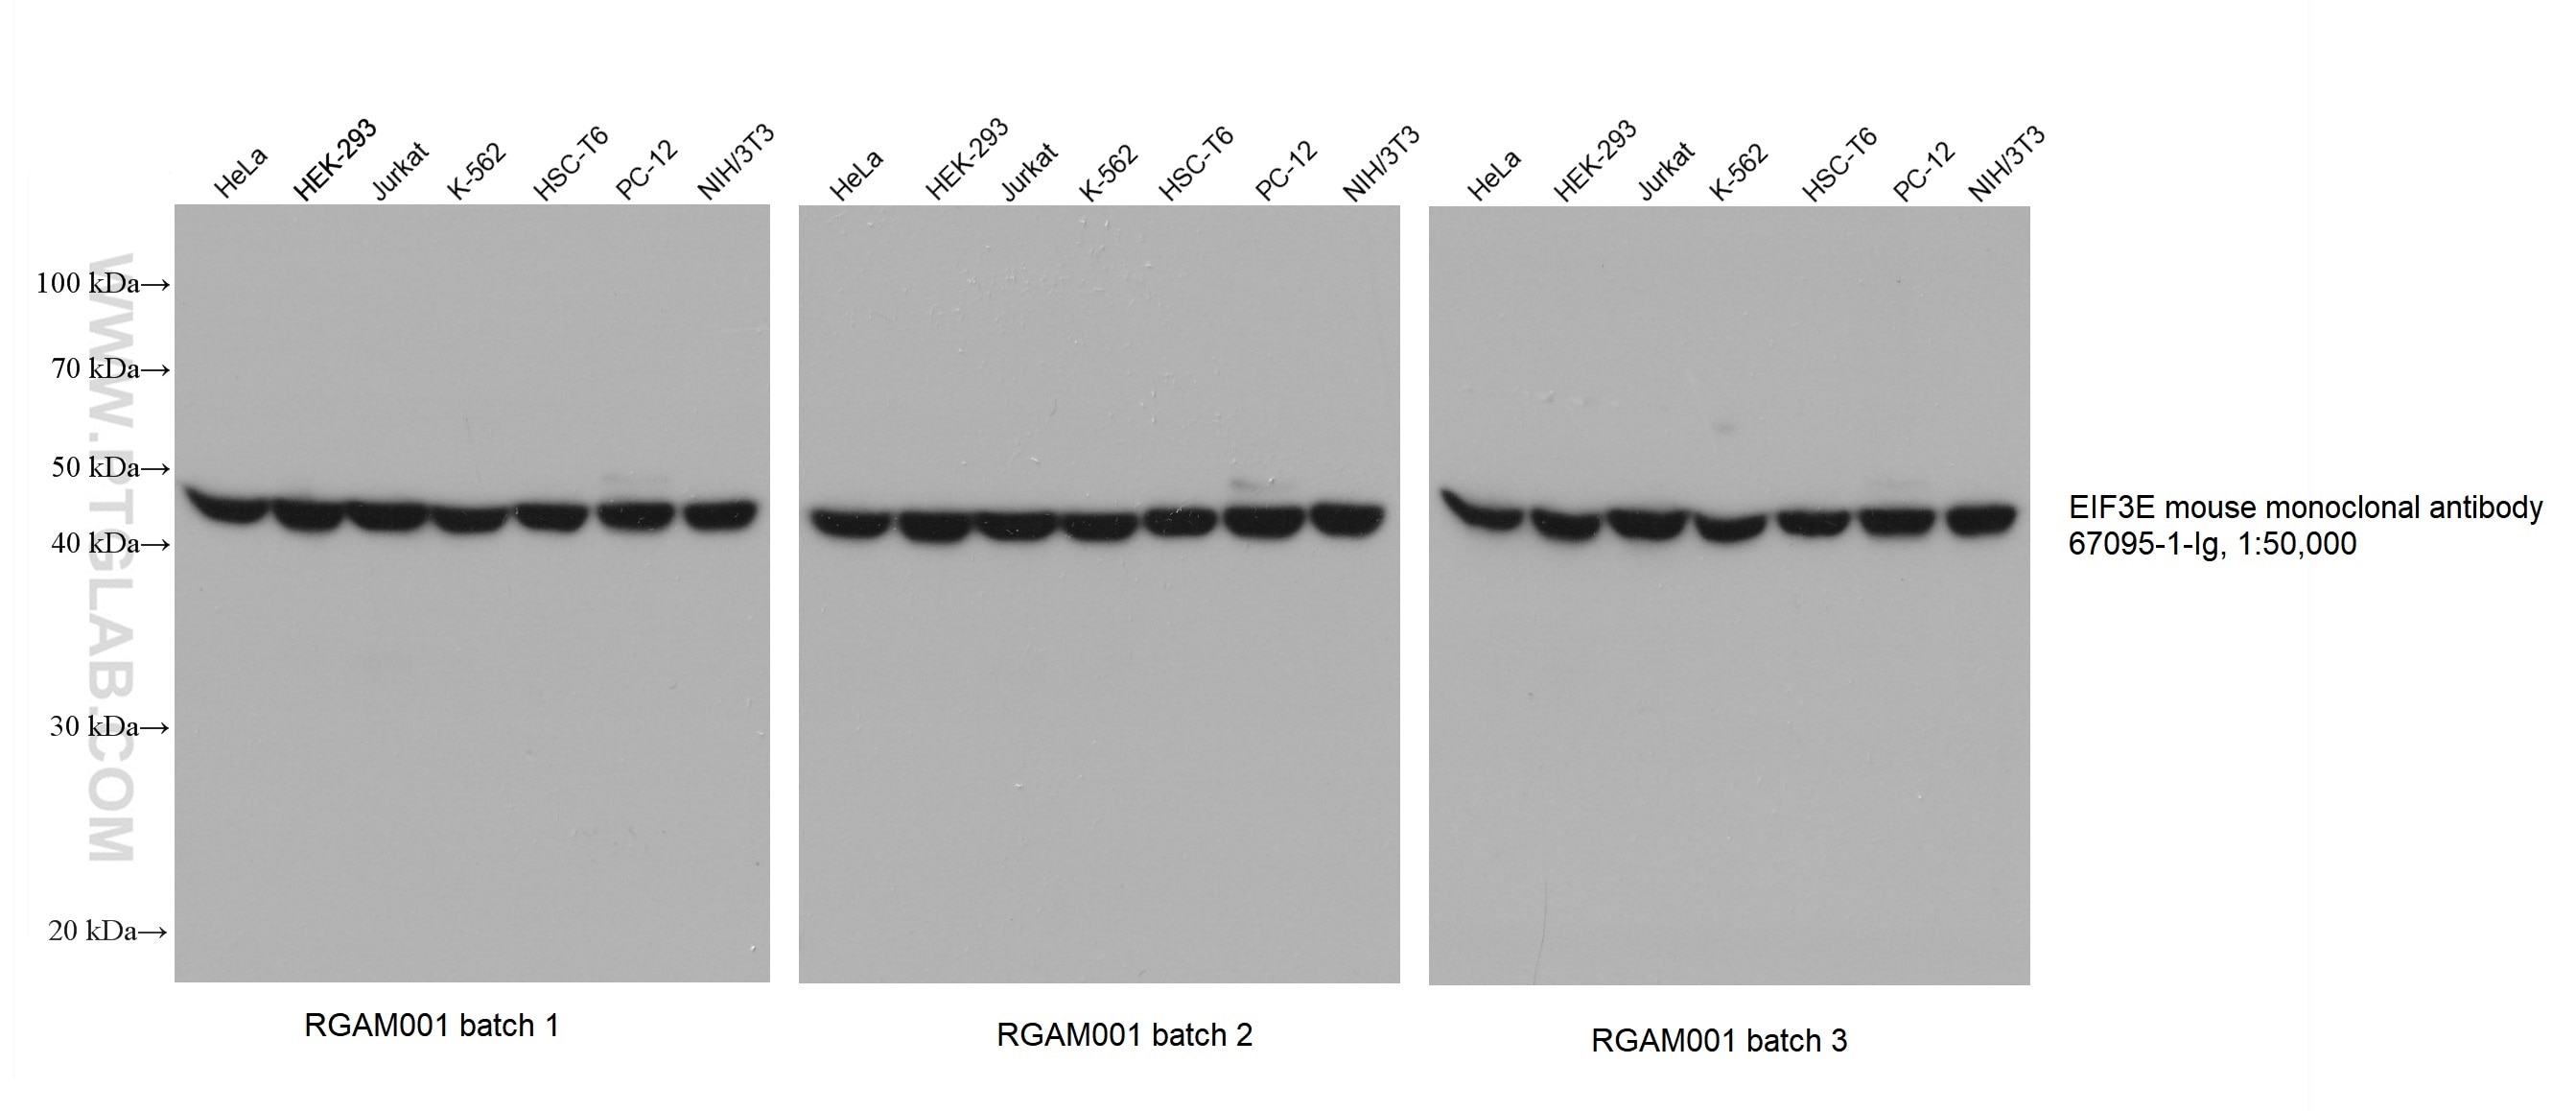 Various lysates were subjected to SDS-PAGE followed by western blot with EIF3E mouse monoclonal antibody (67095-1-Ig) at a dilution of 1:50000. Three separate batches of Multi-rAb HRP-Goat Anti-Mouse Recombinant Secondary Antibody (H+L) (RGAM001) were used at a dilution of 1:20000 for detection. 	 